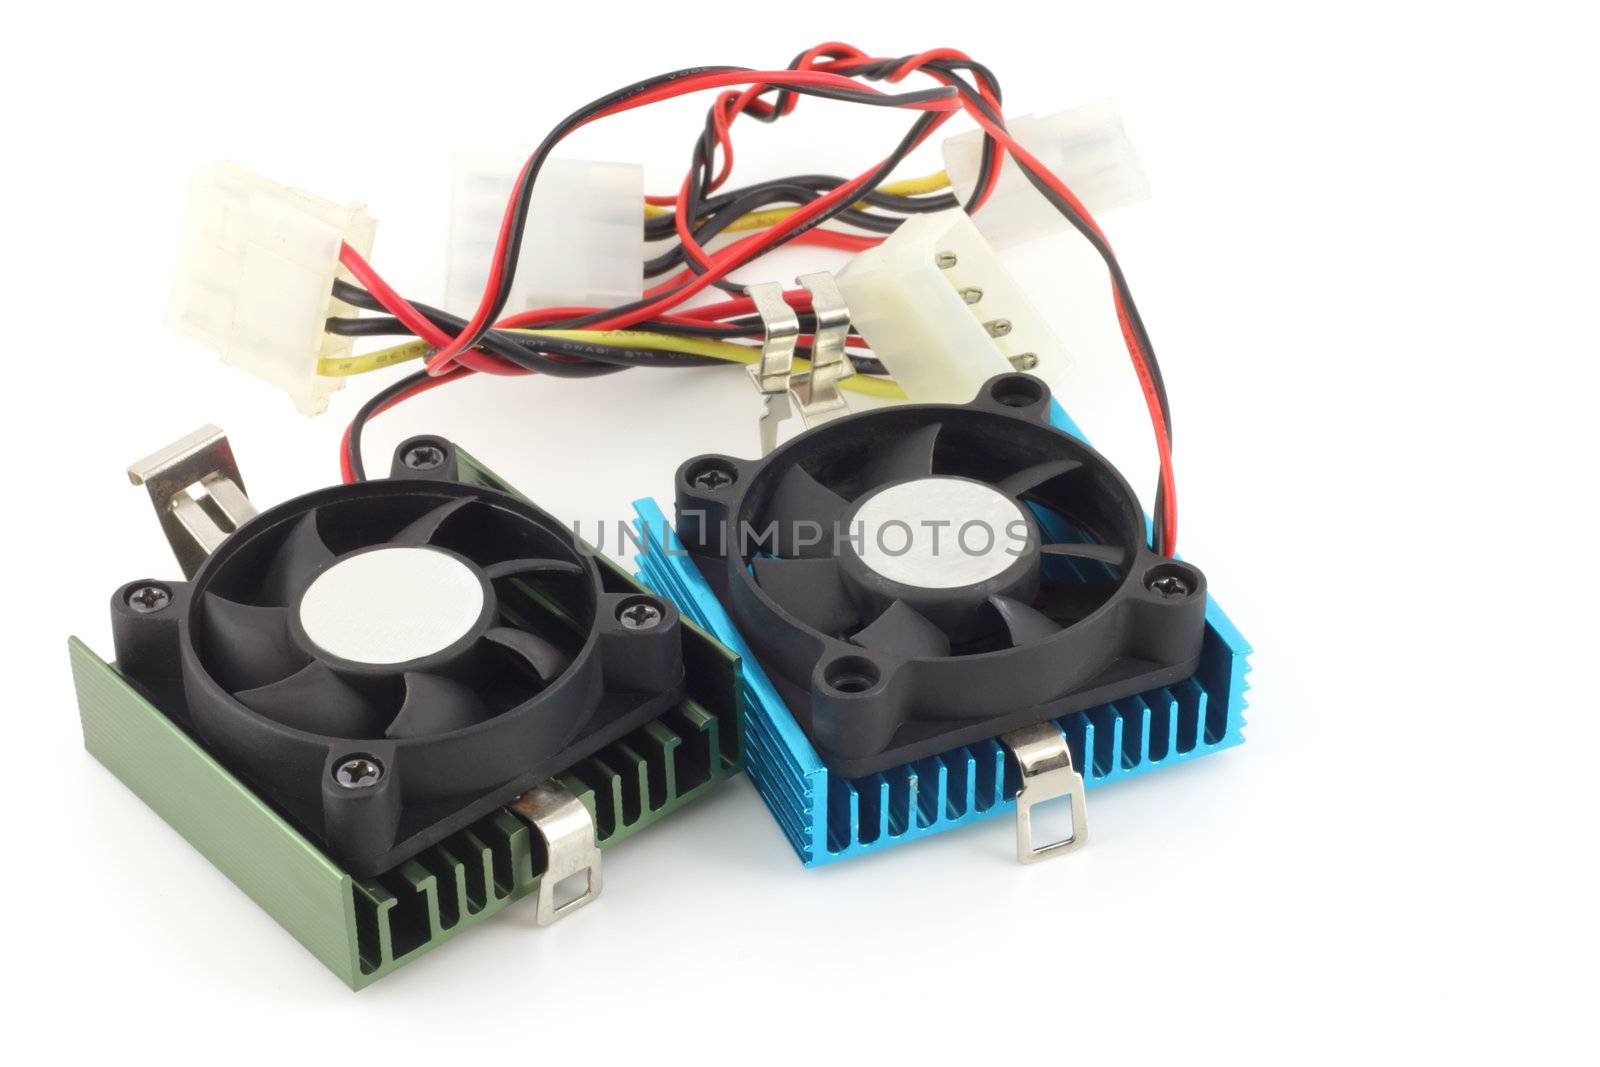 Fans and radiators for computer over white